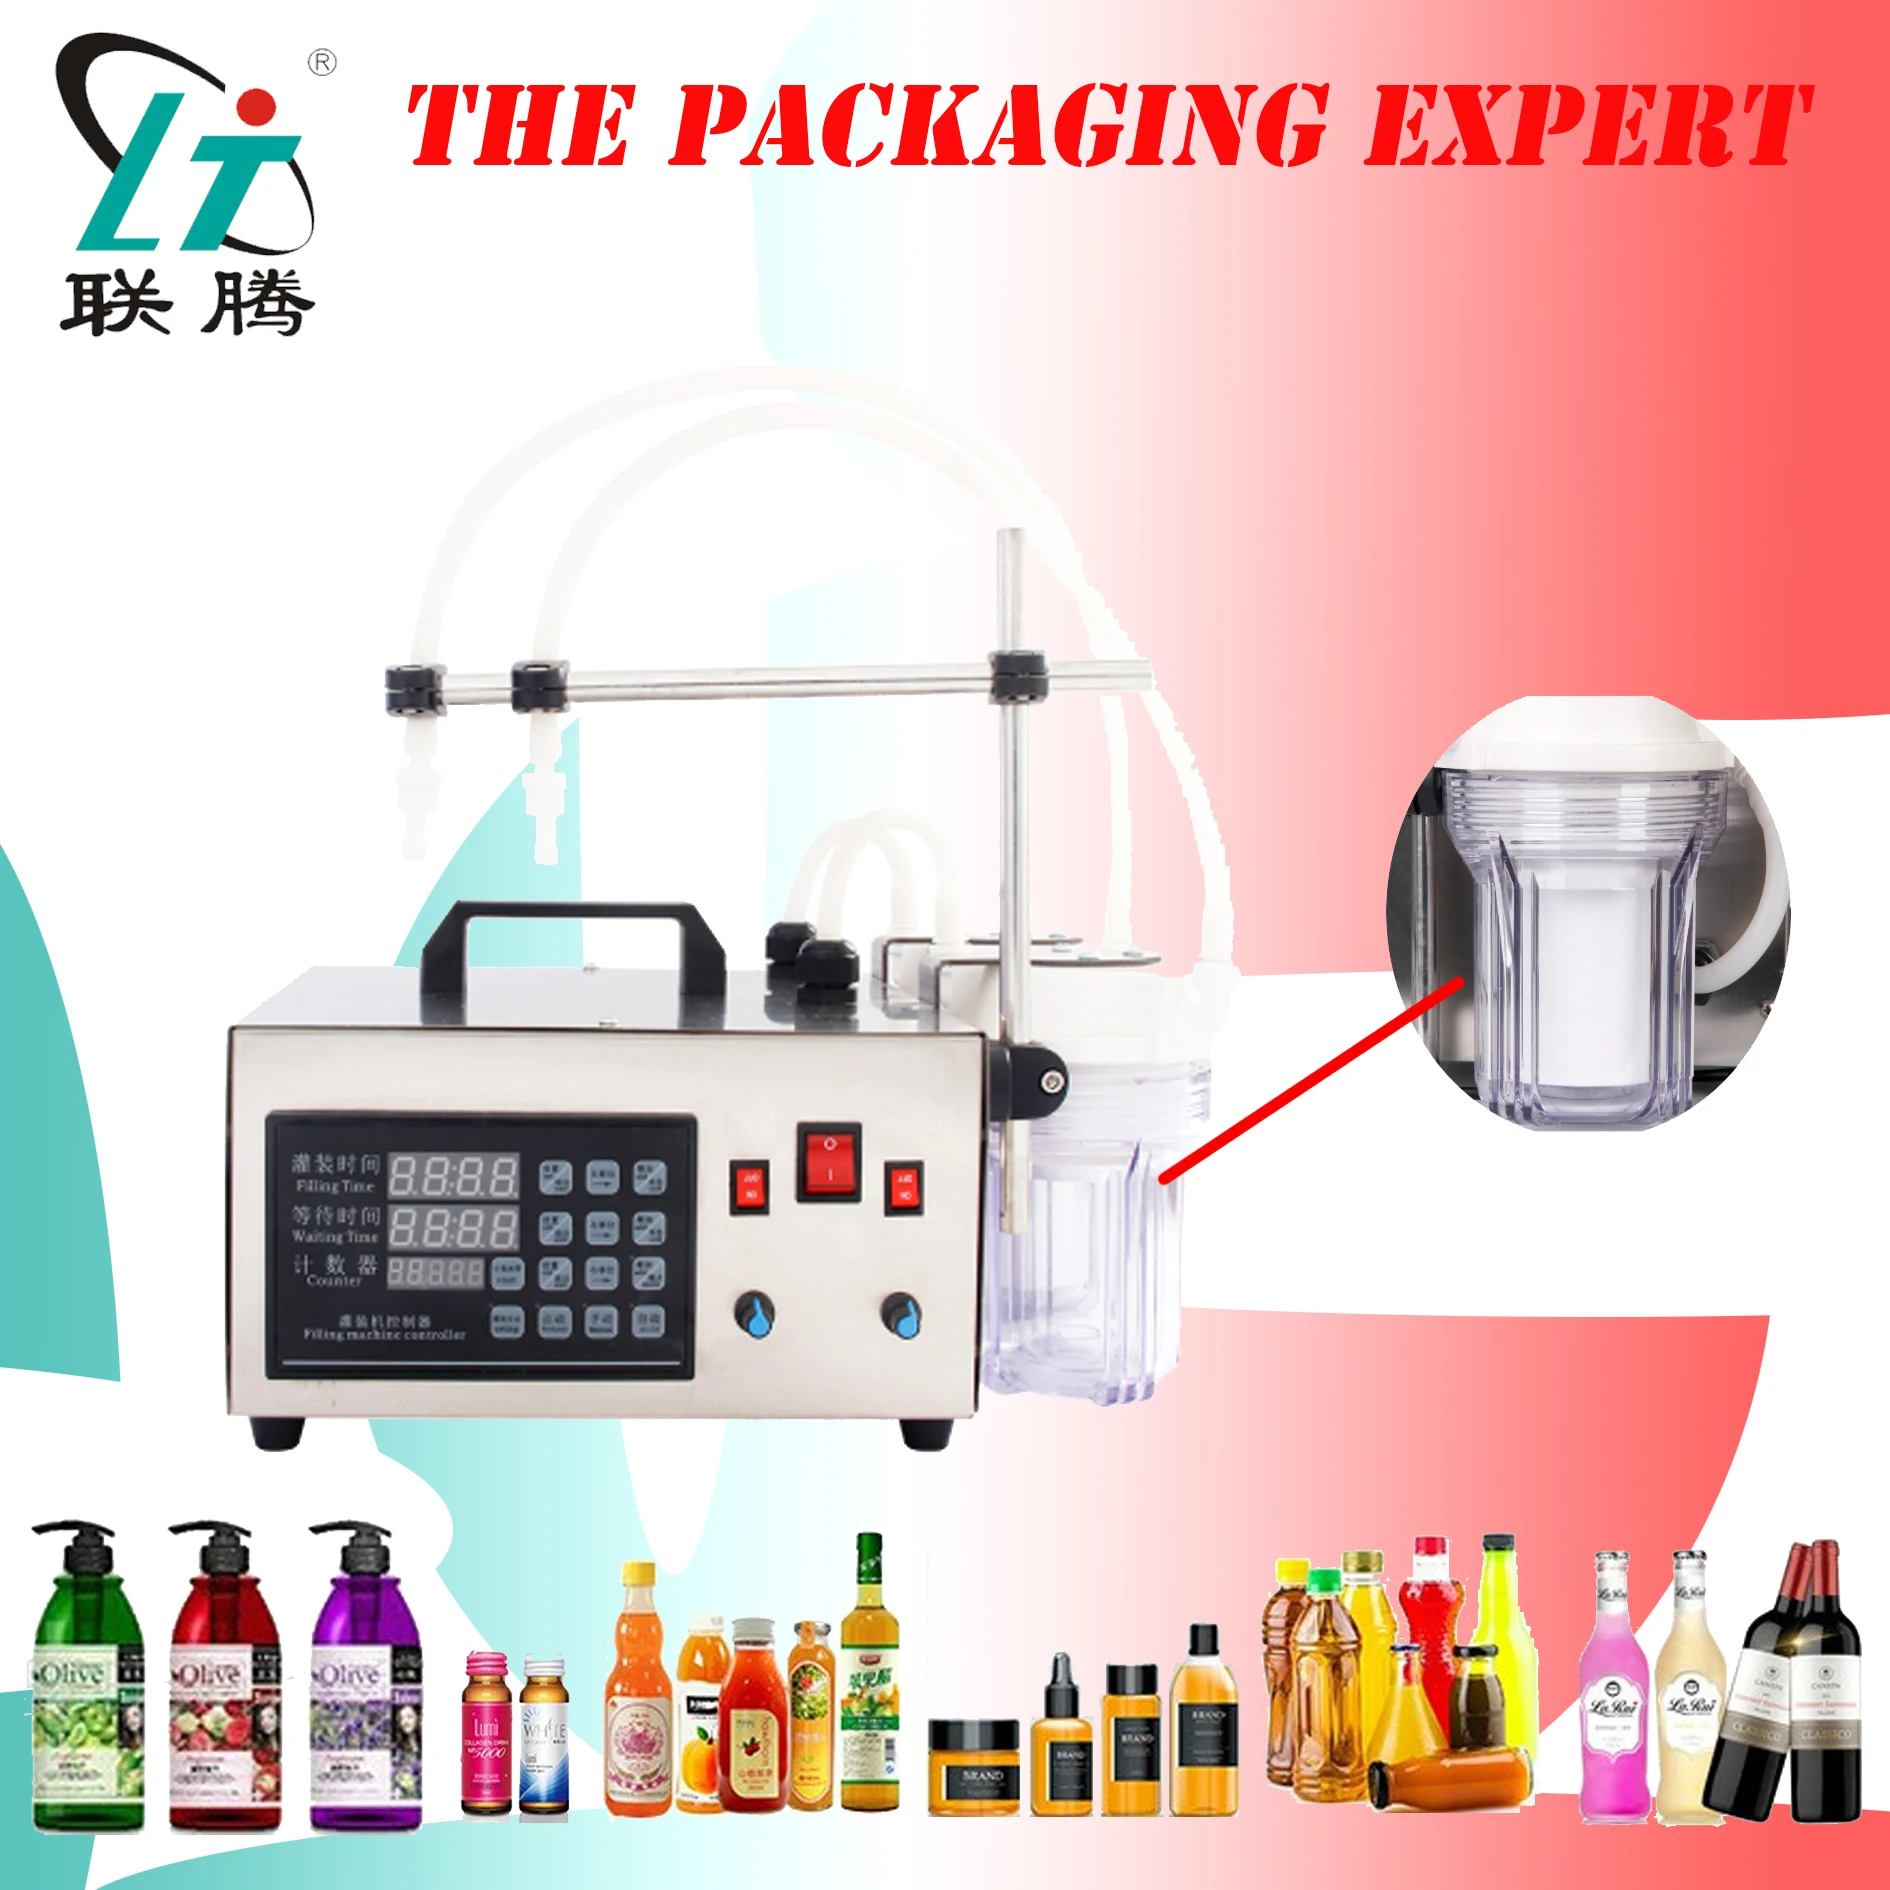 

Digital Control Liquid Filling Machine Double Heads 2 Nozzles With Filter Food Safe Health Filler 4 Drinks Juice Liquor Chemical